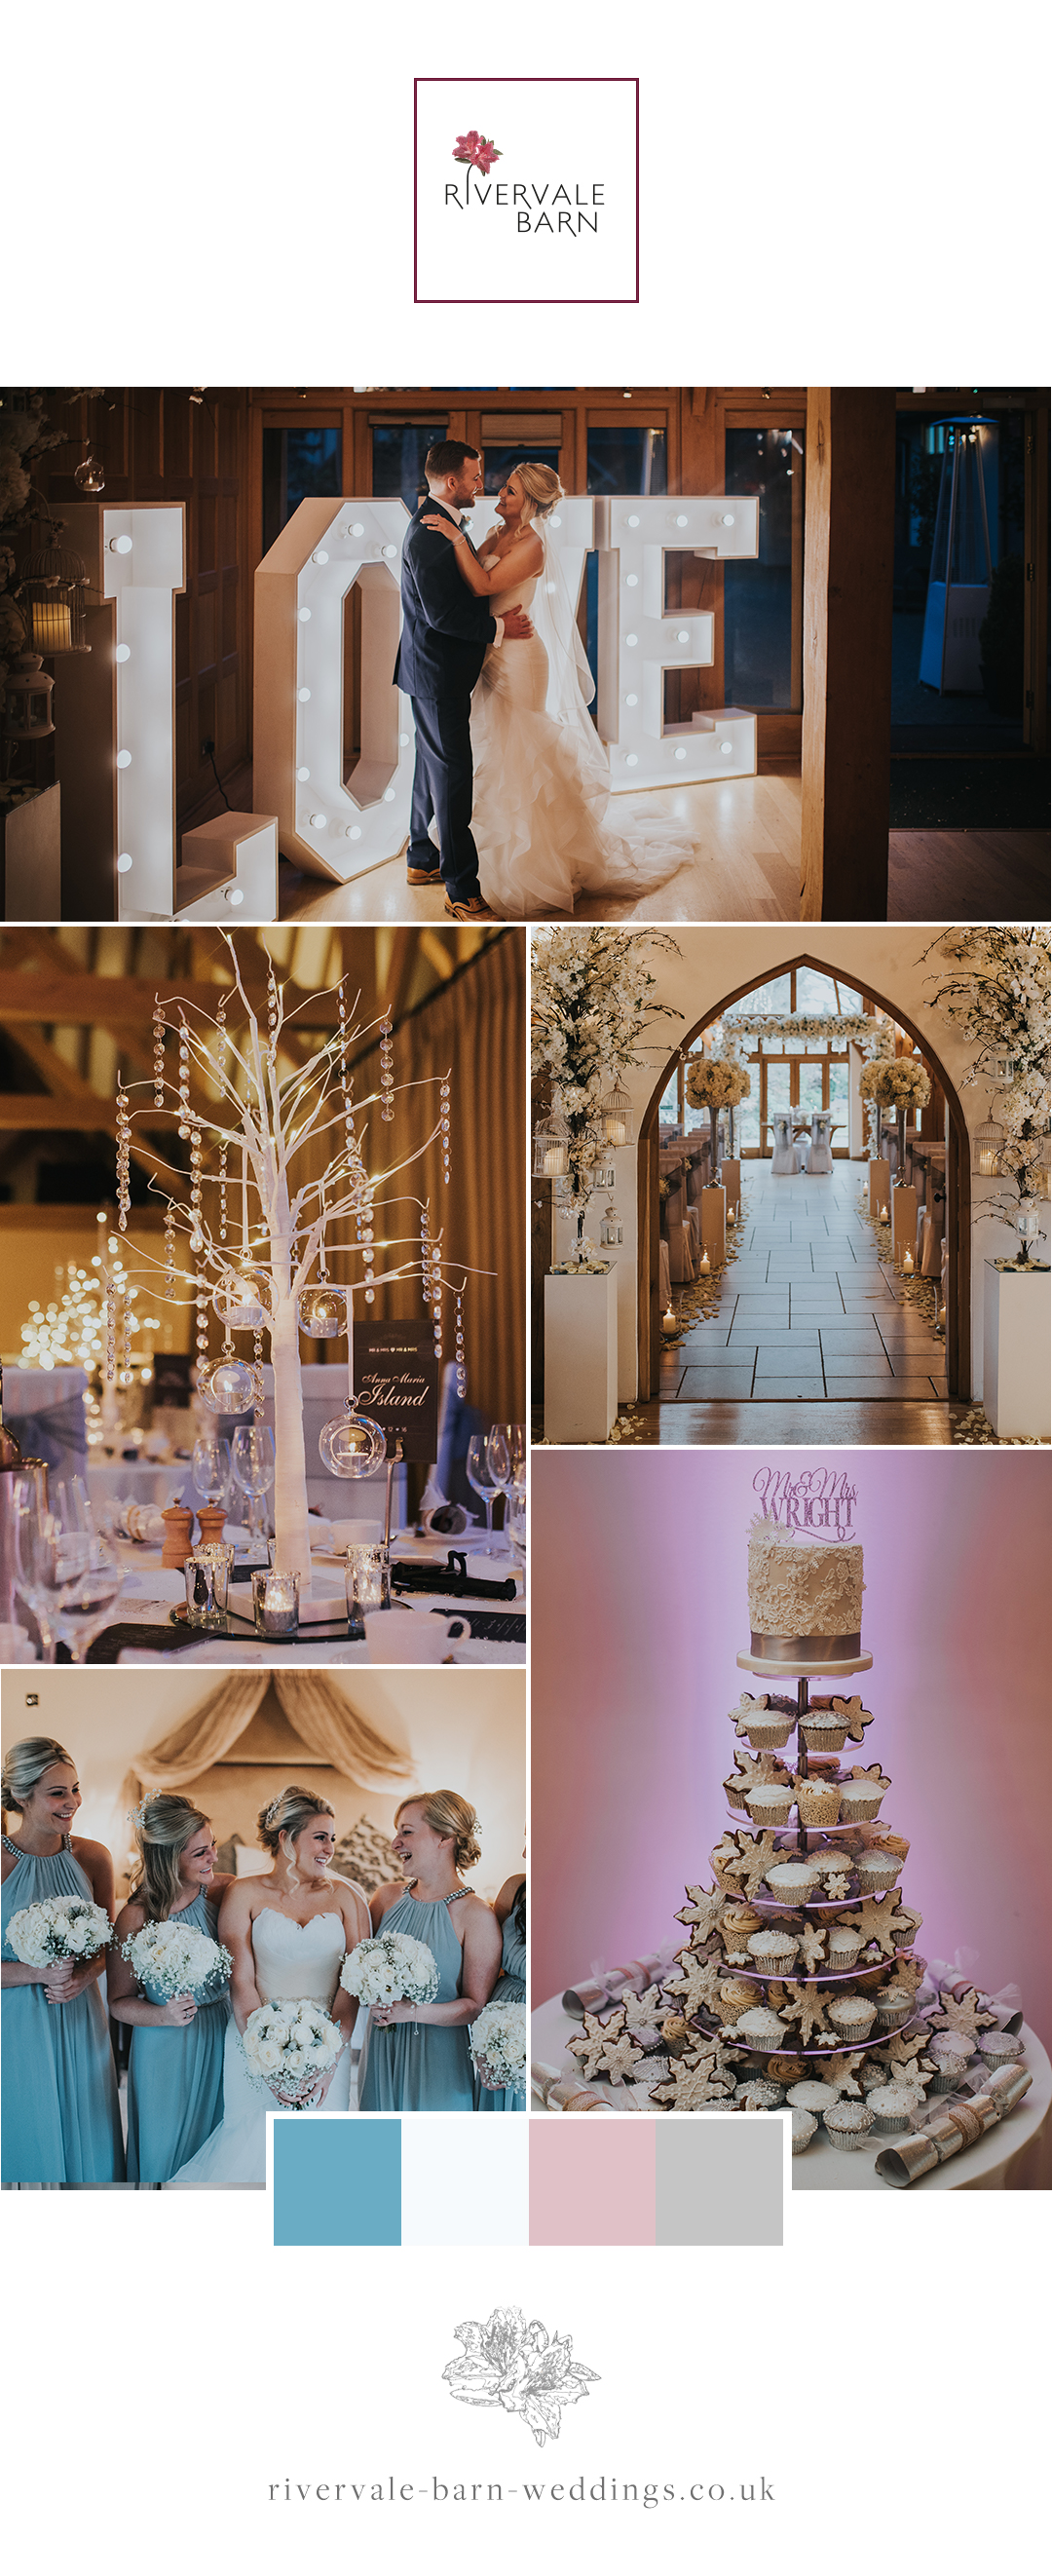 Michelle and Chris' real life wedding at Rivervale Barn